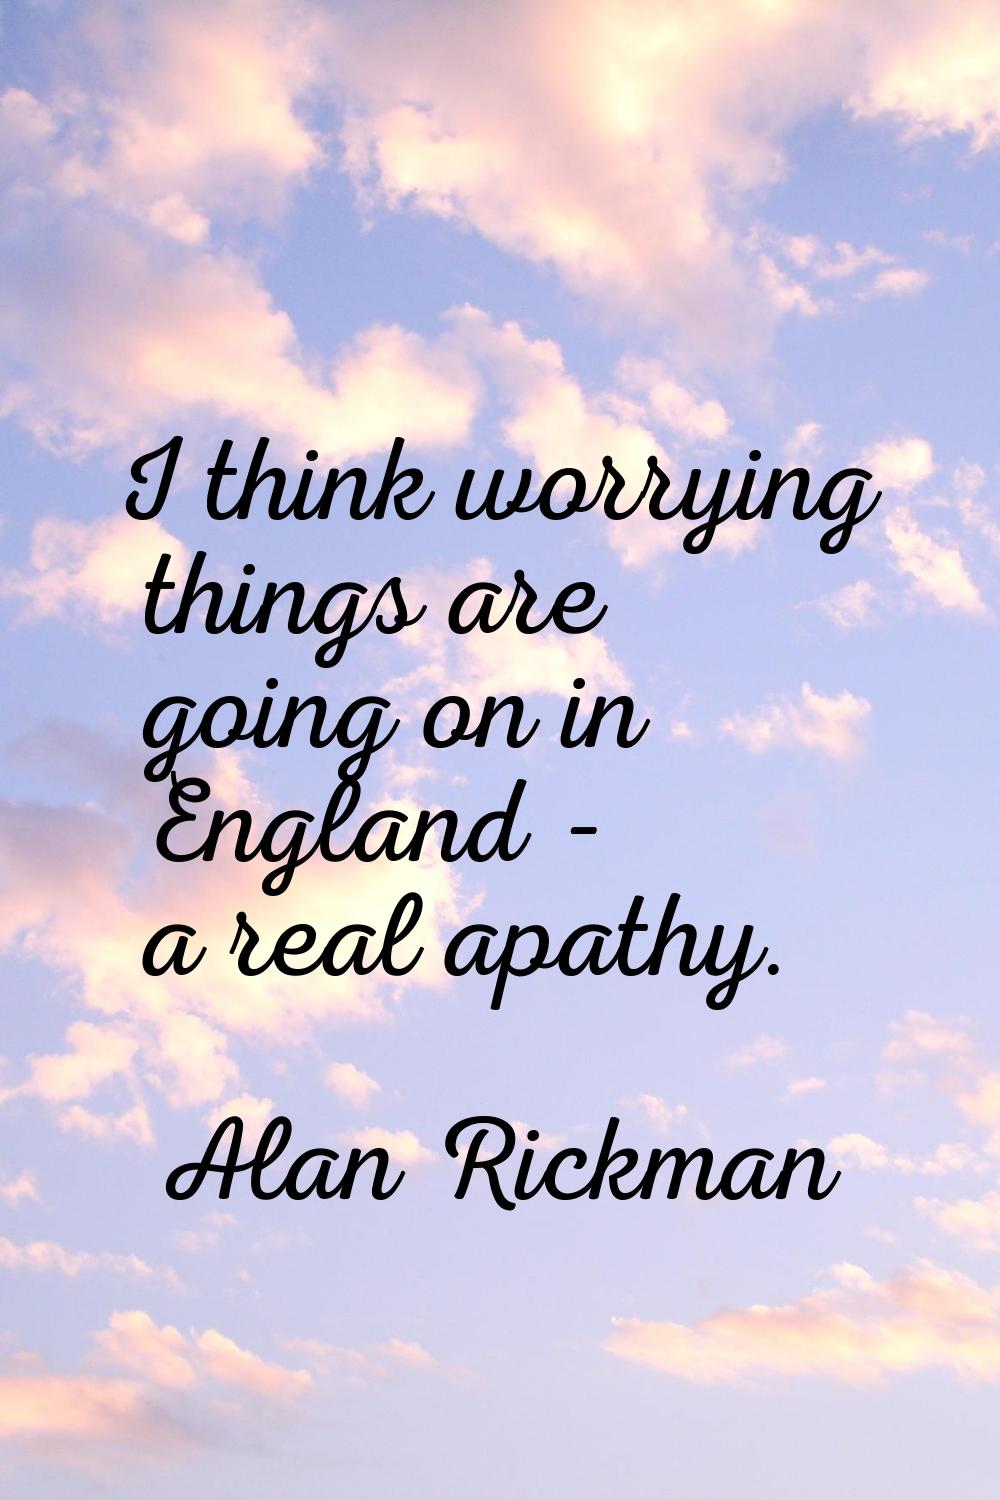 I think worrying things are going on in England - a real apathy.